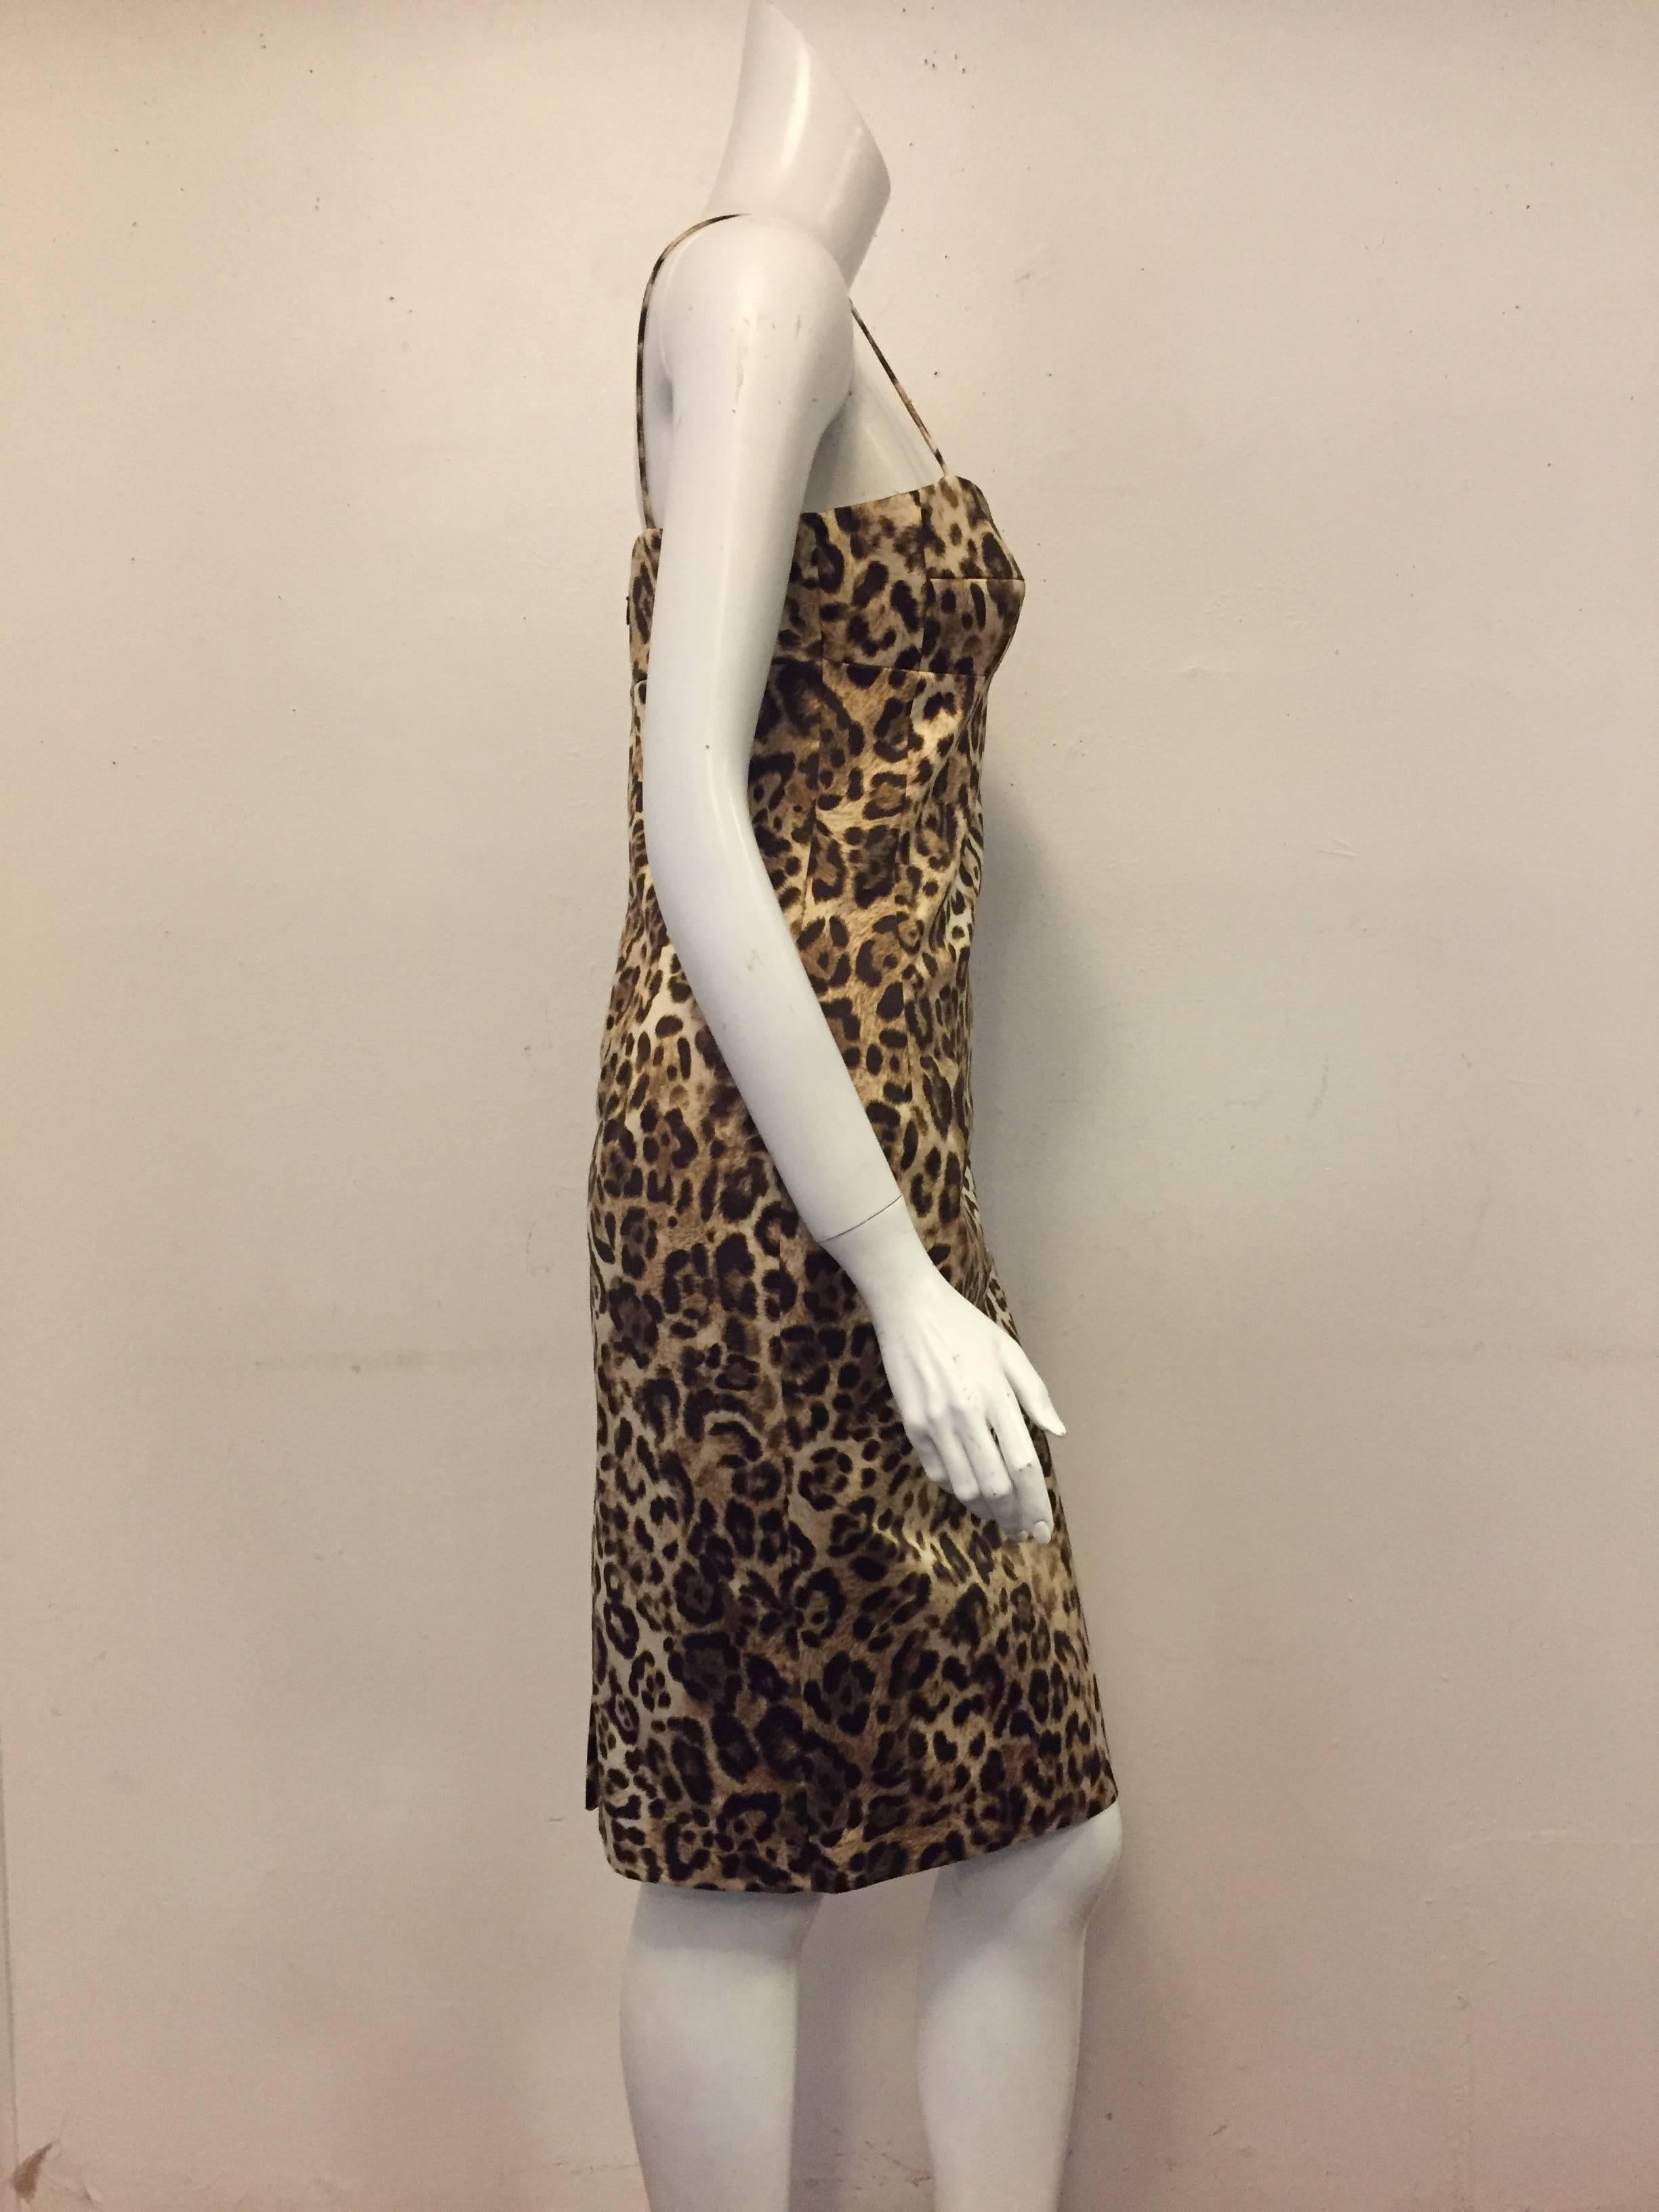 Michael Kors dress features a rust and black leopard print allover.  Flattering sweetheart neckline with spaghetti straps and body hugging silhouette is timeless and goes from day to evening with ease.  Wear belted, or not.  Fully lined.  Excellent